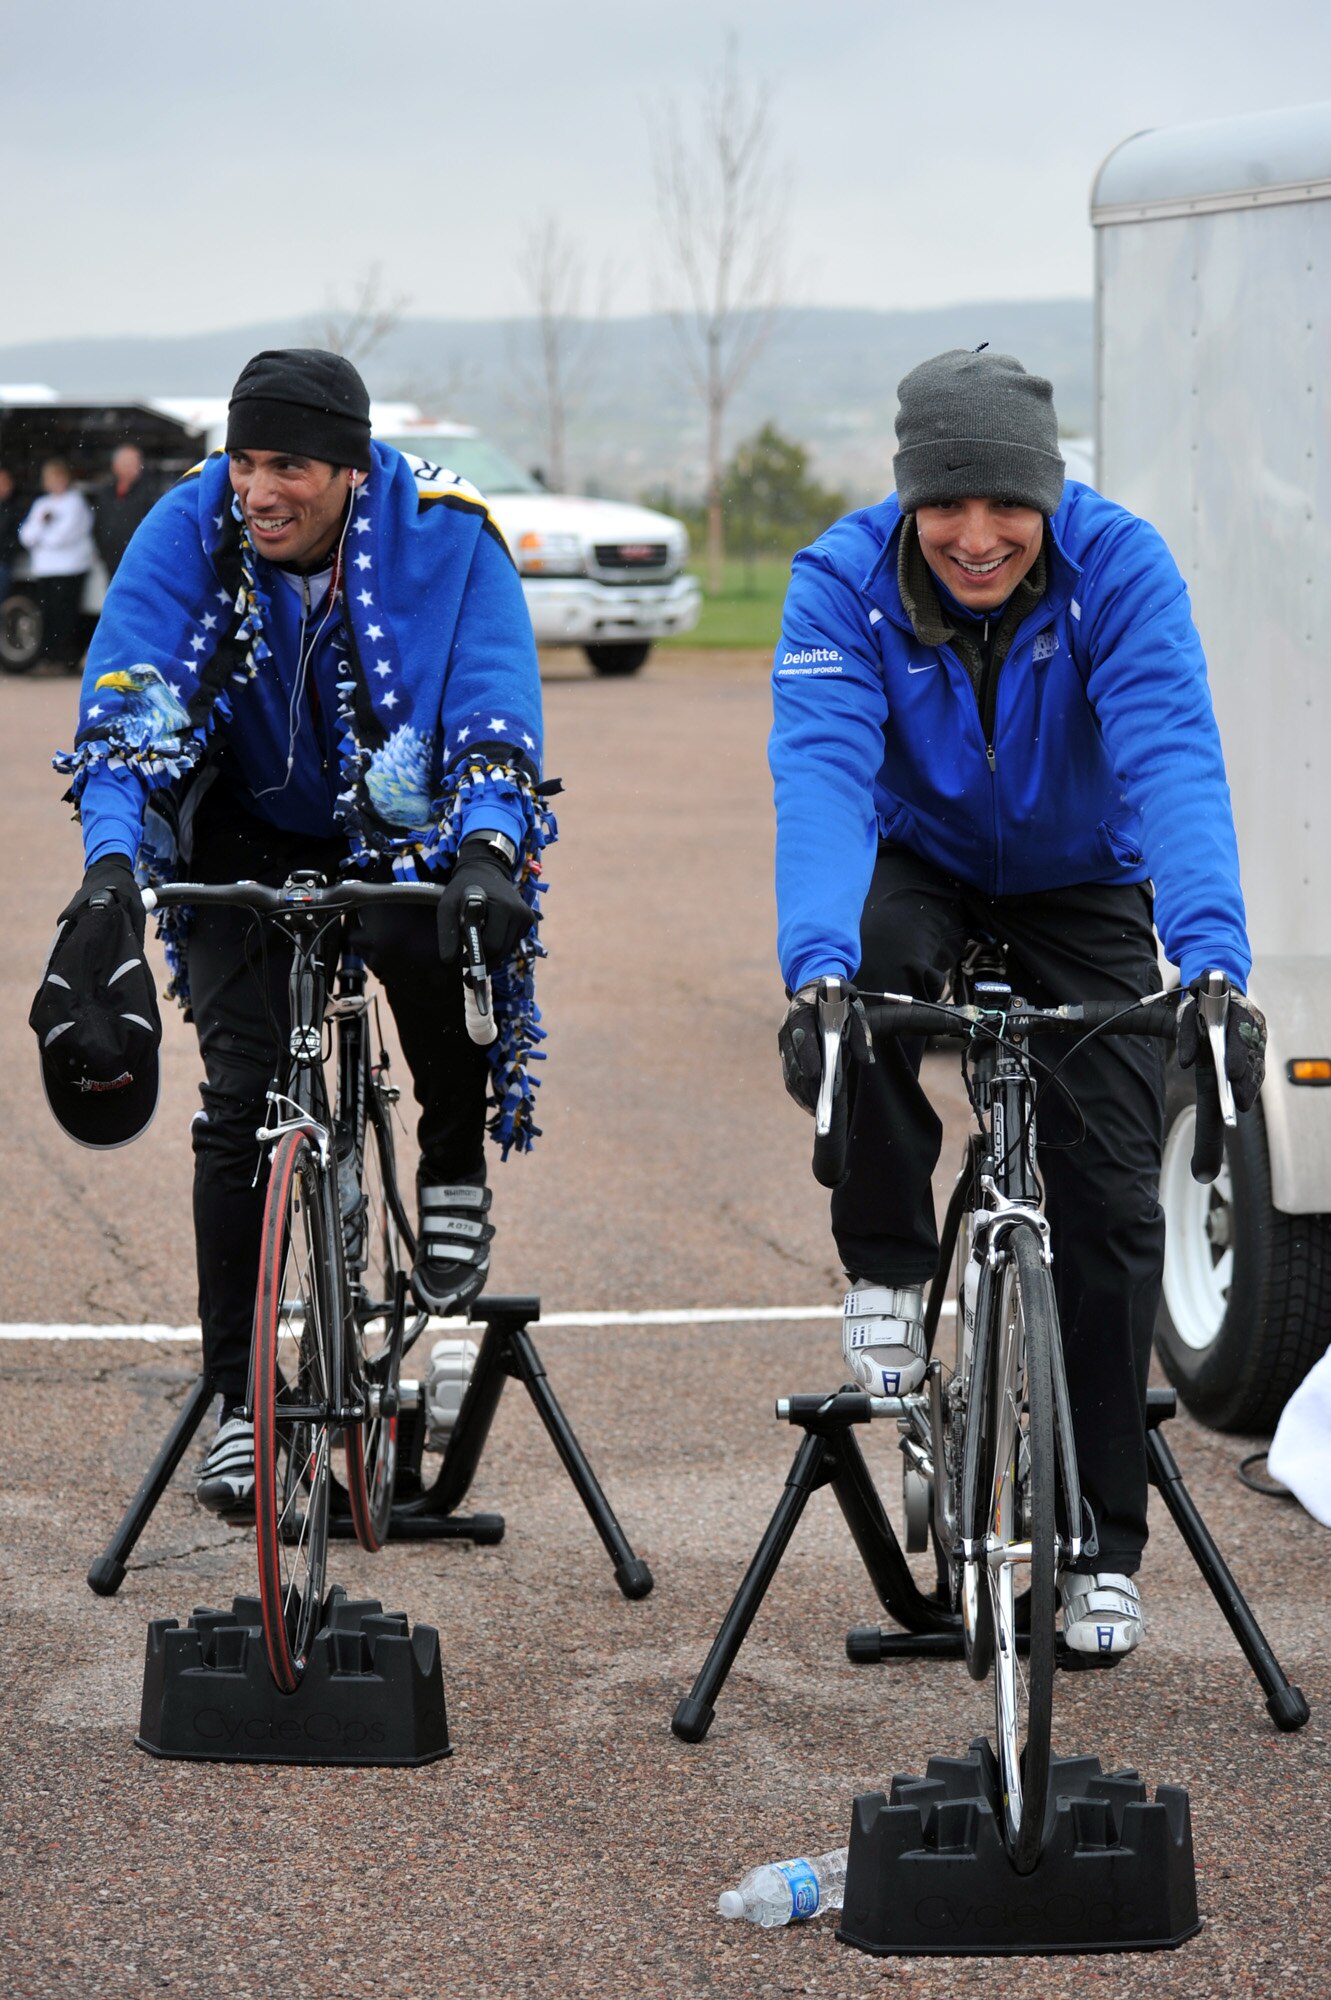 Staff Sgt. Marc Esposito and Adam Tanverdi warm up before competing in the 20-kilometer upright bike race for the inaugural Warrior Games May 13, 2010, at the U.S. Air Force Academy in Colorado Springs, Colo. (U.S. Air Force photo/Staff Sgt. Desiree N. Palacios)